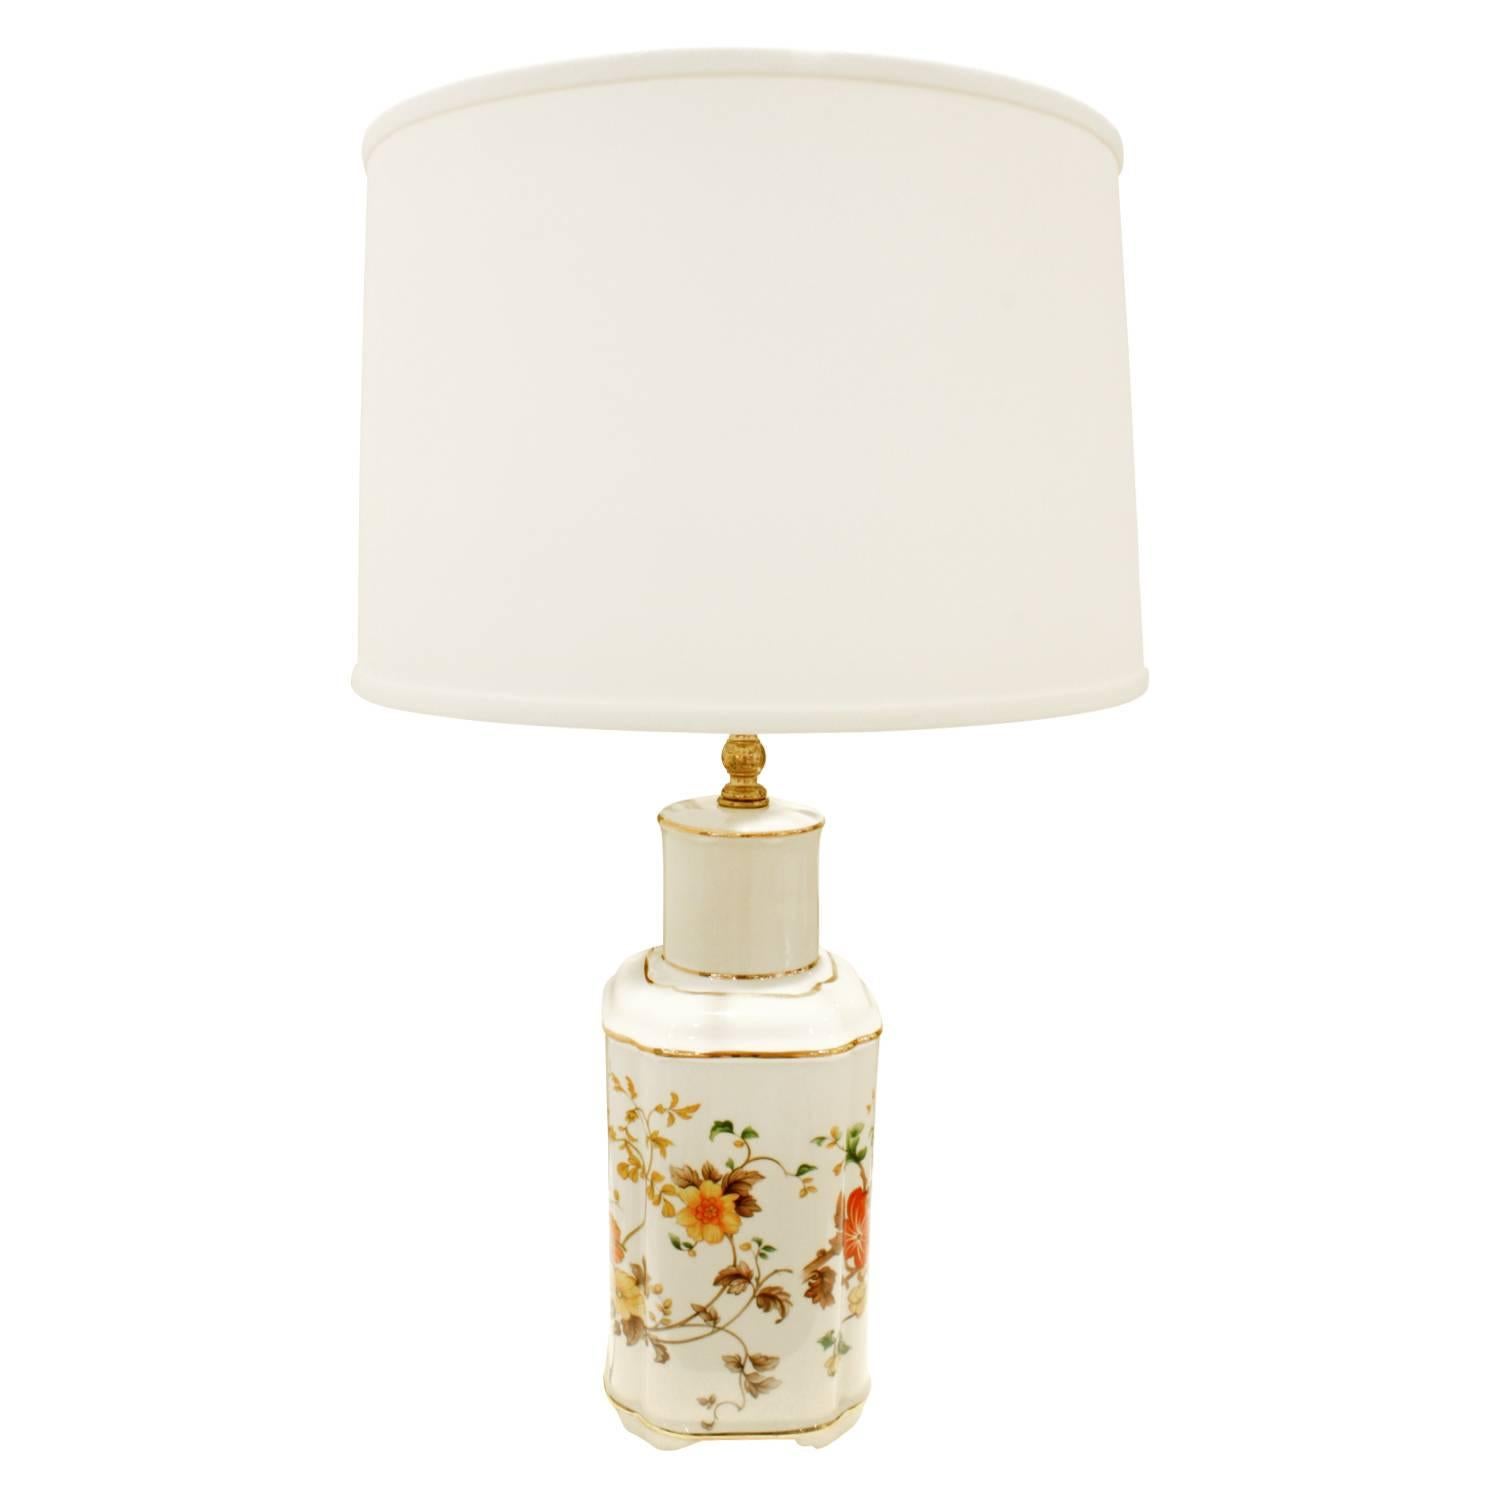 Modern  Studio Made Porcelain Table Lamp with Flowers, 1960s For Sale